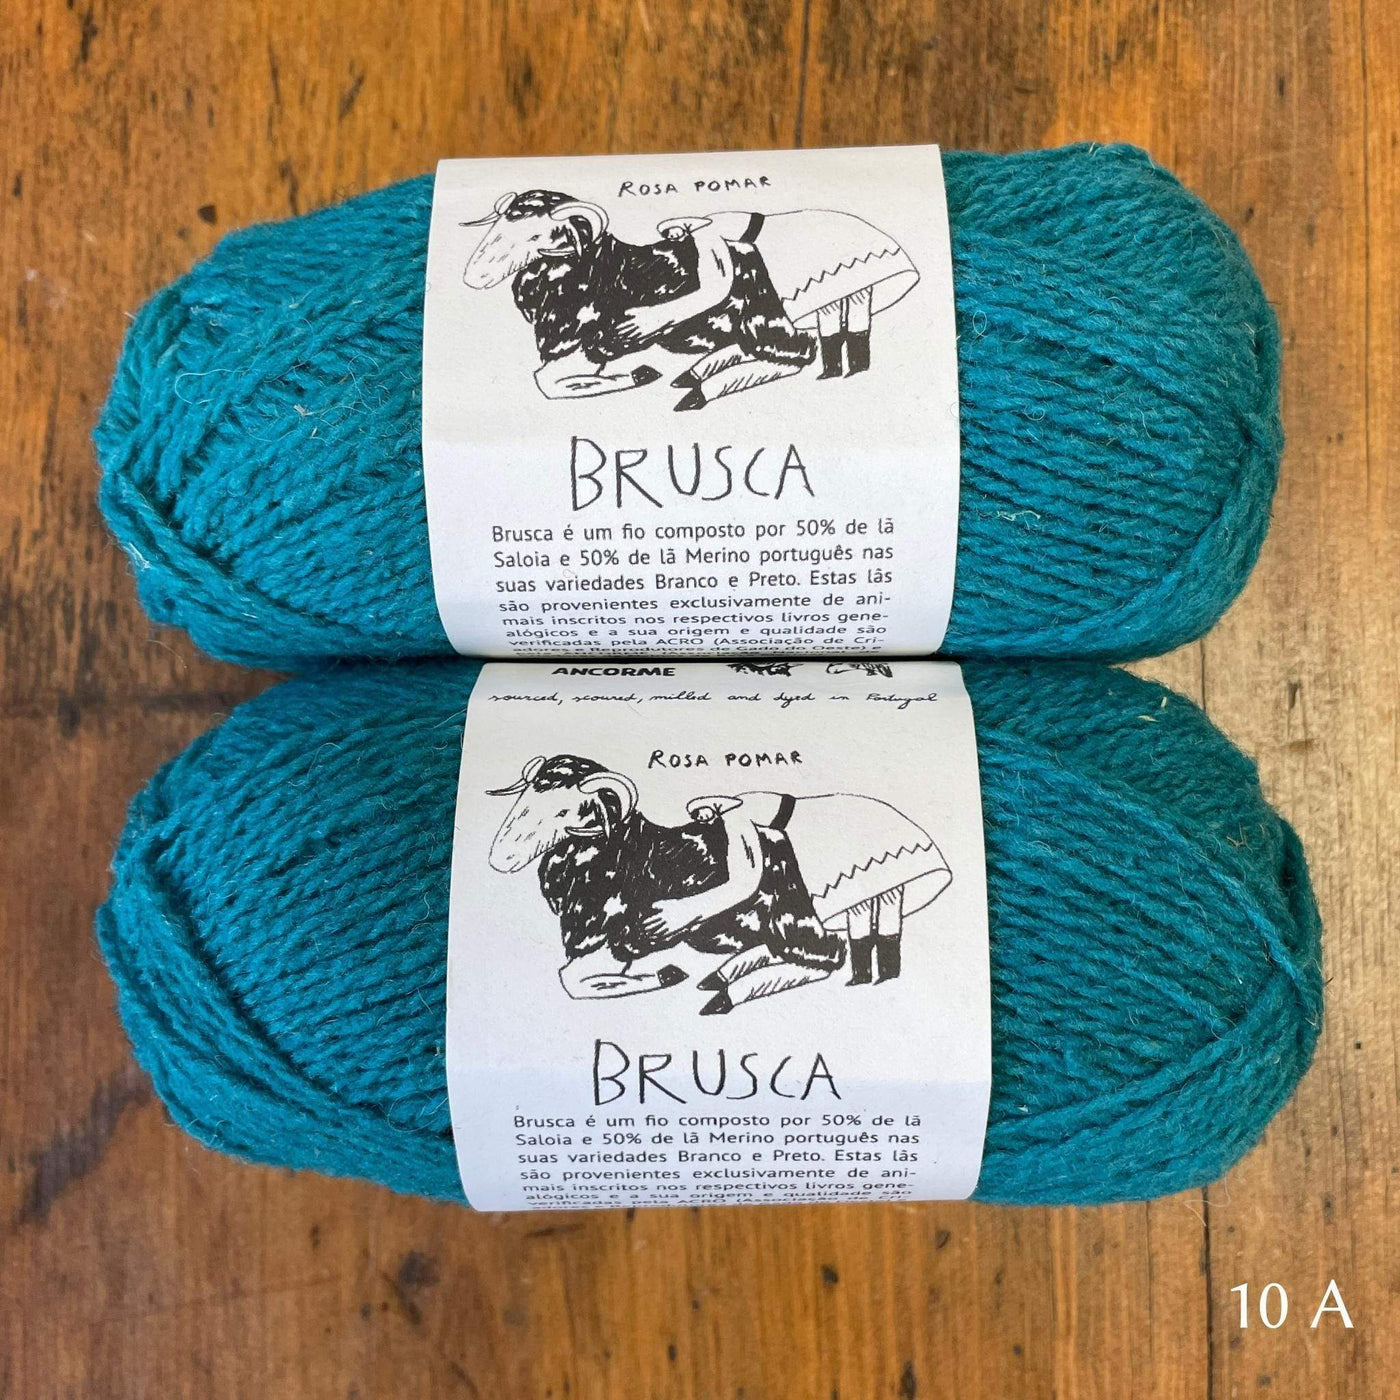 The Woolly Thistle Retrosaria Brusca DK Yarn in 10 A (turqouise)